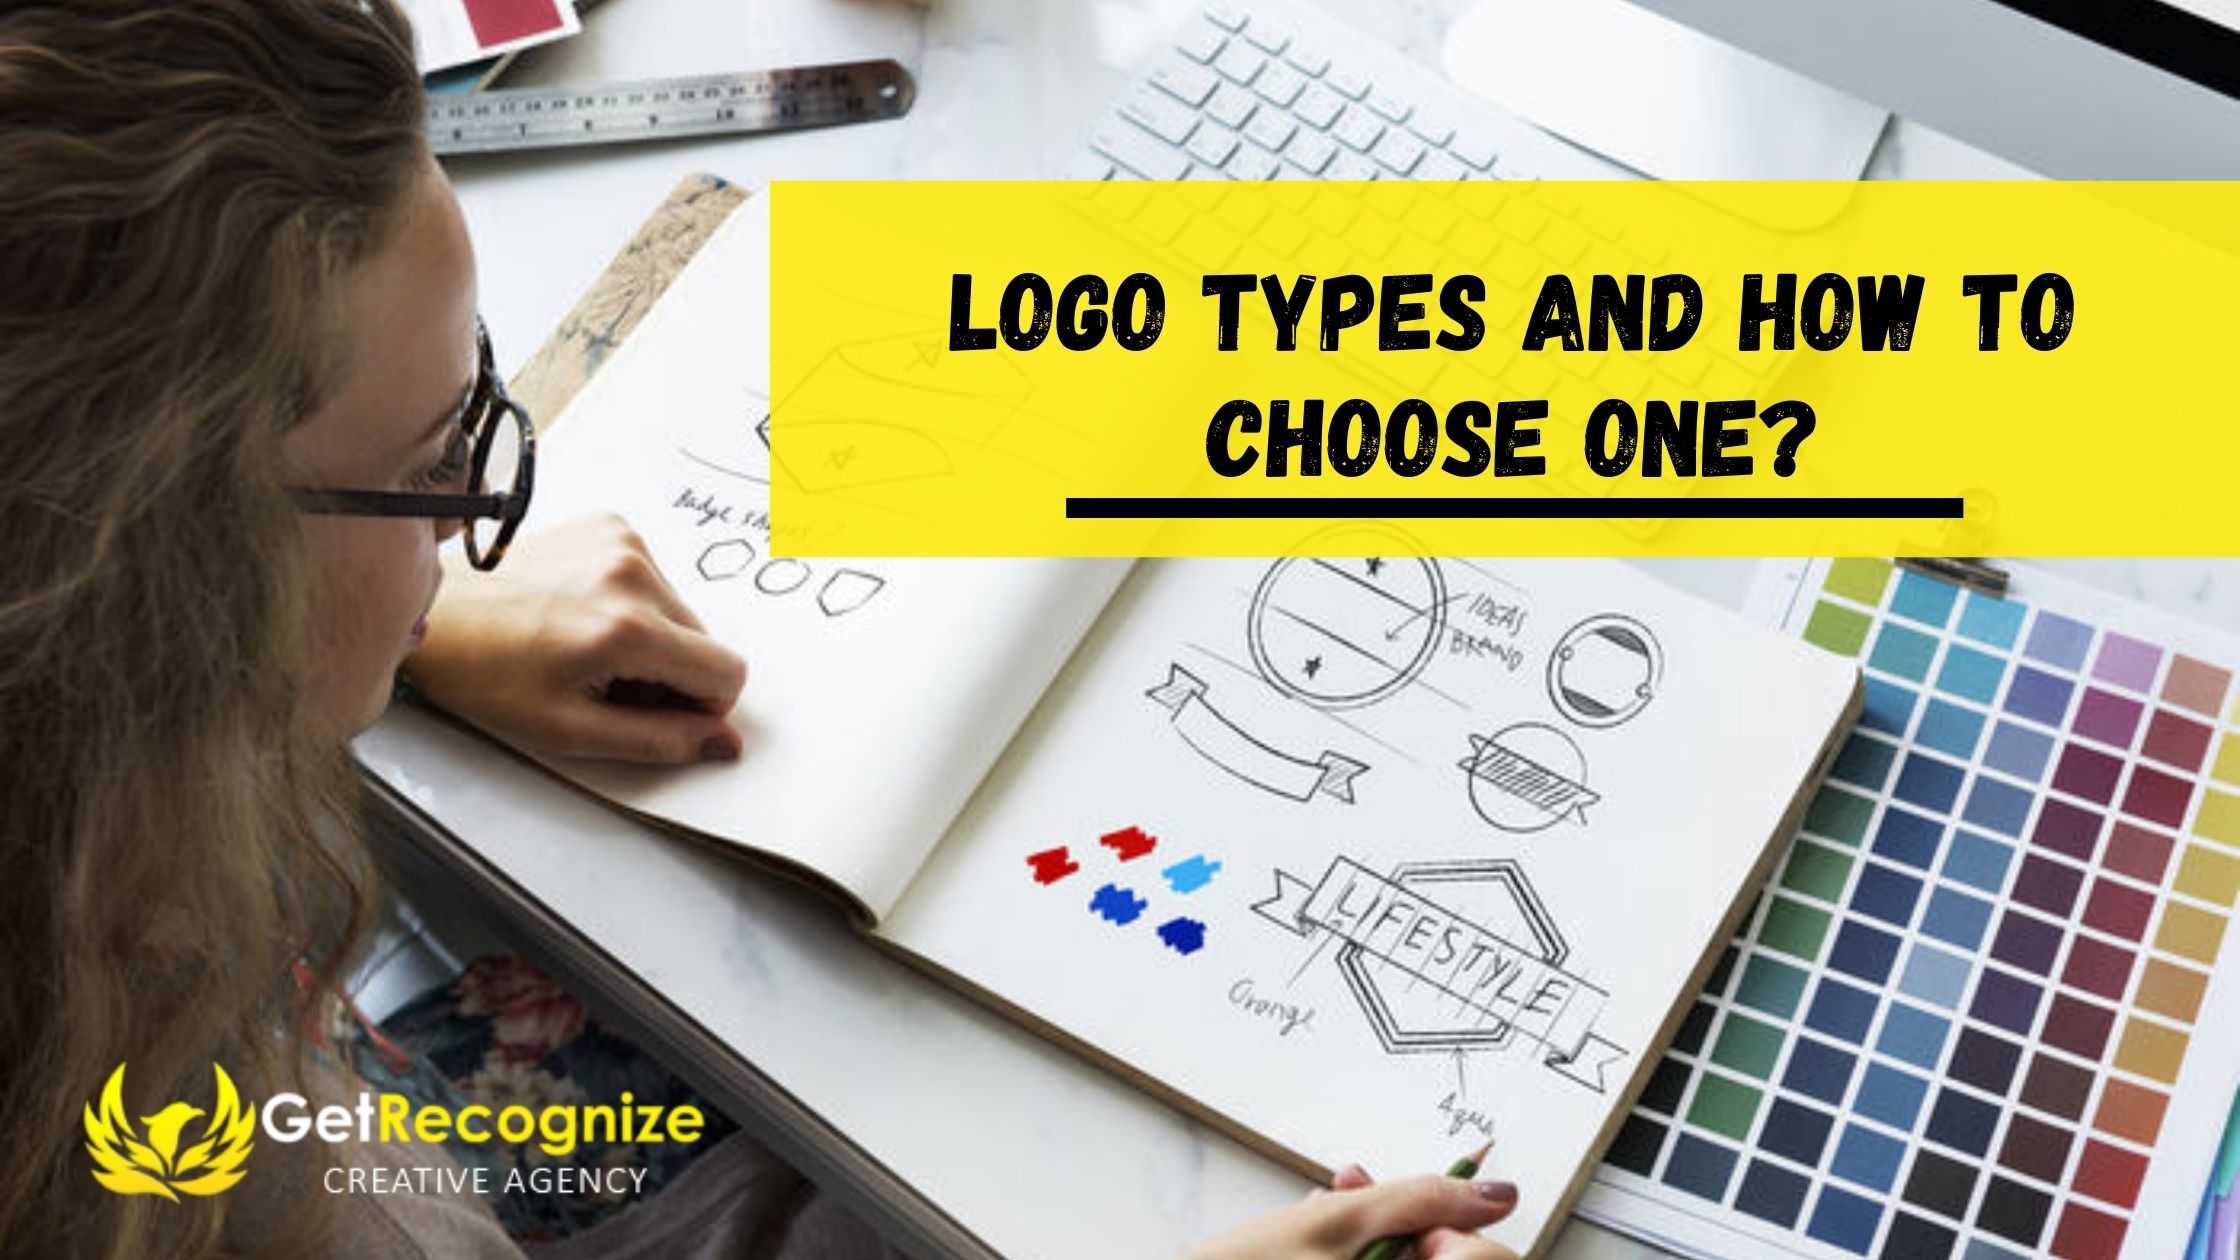 Logo types and how to choose one?